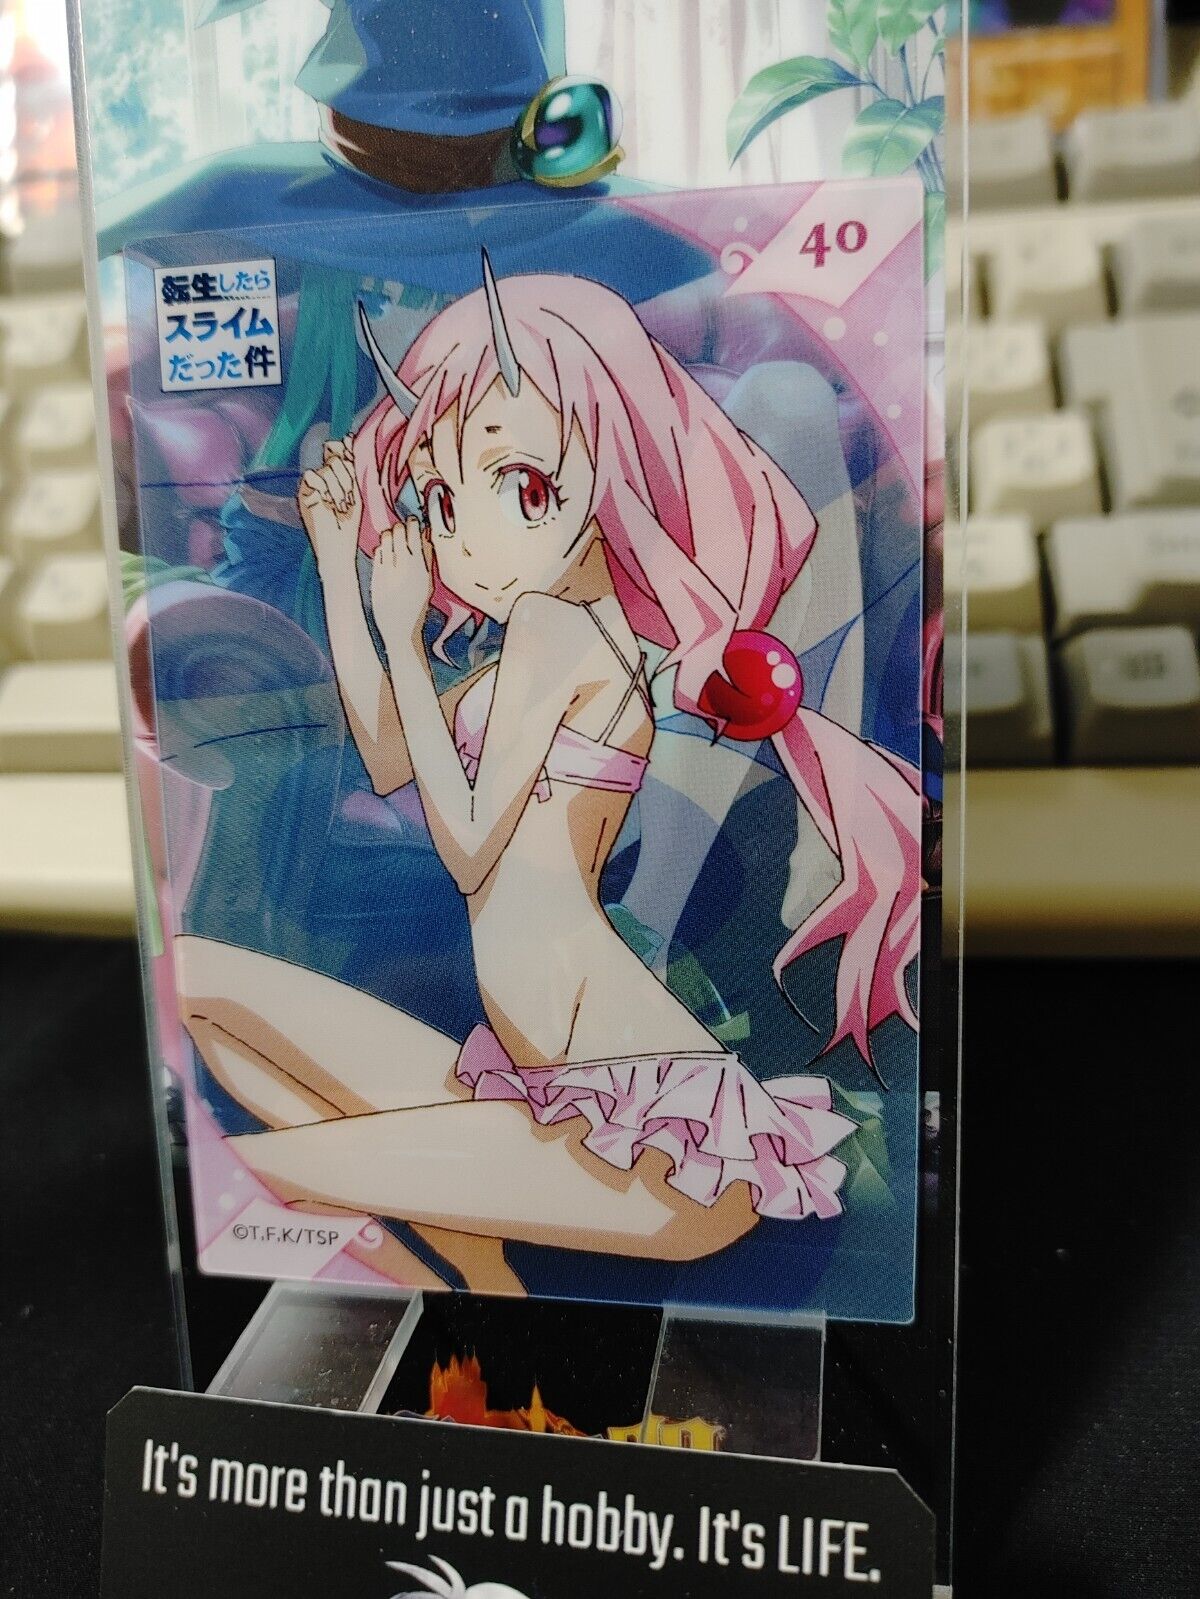 That Time I Got Reincarnated As A Slime Clear Card Collection Shuna No. 40 Japan